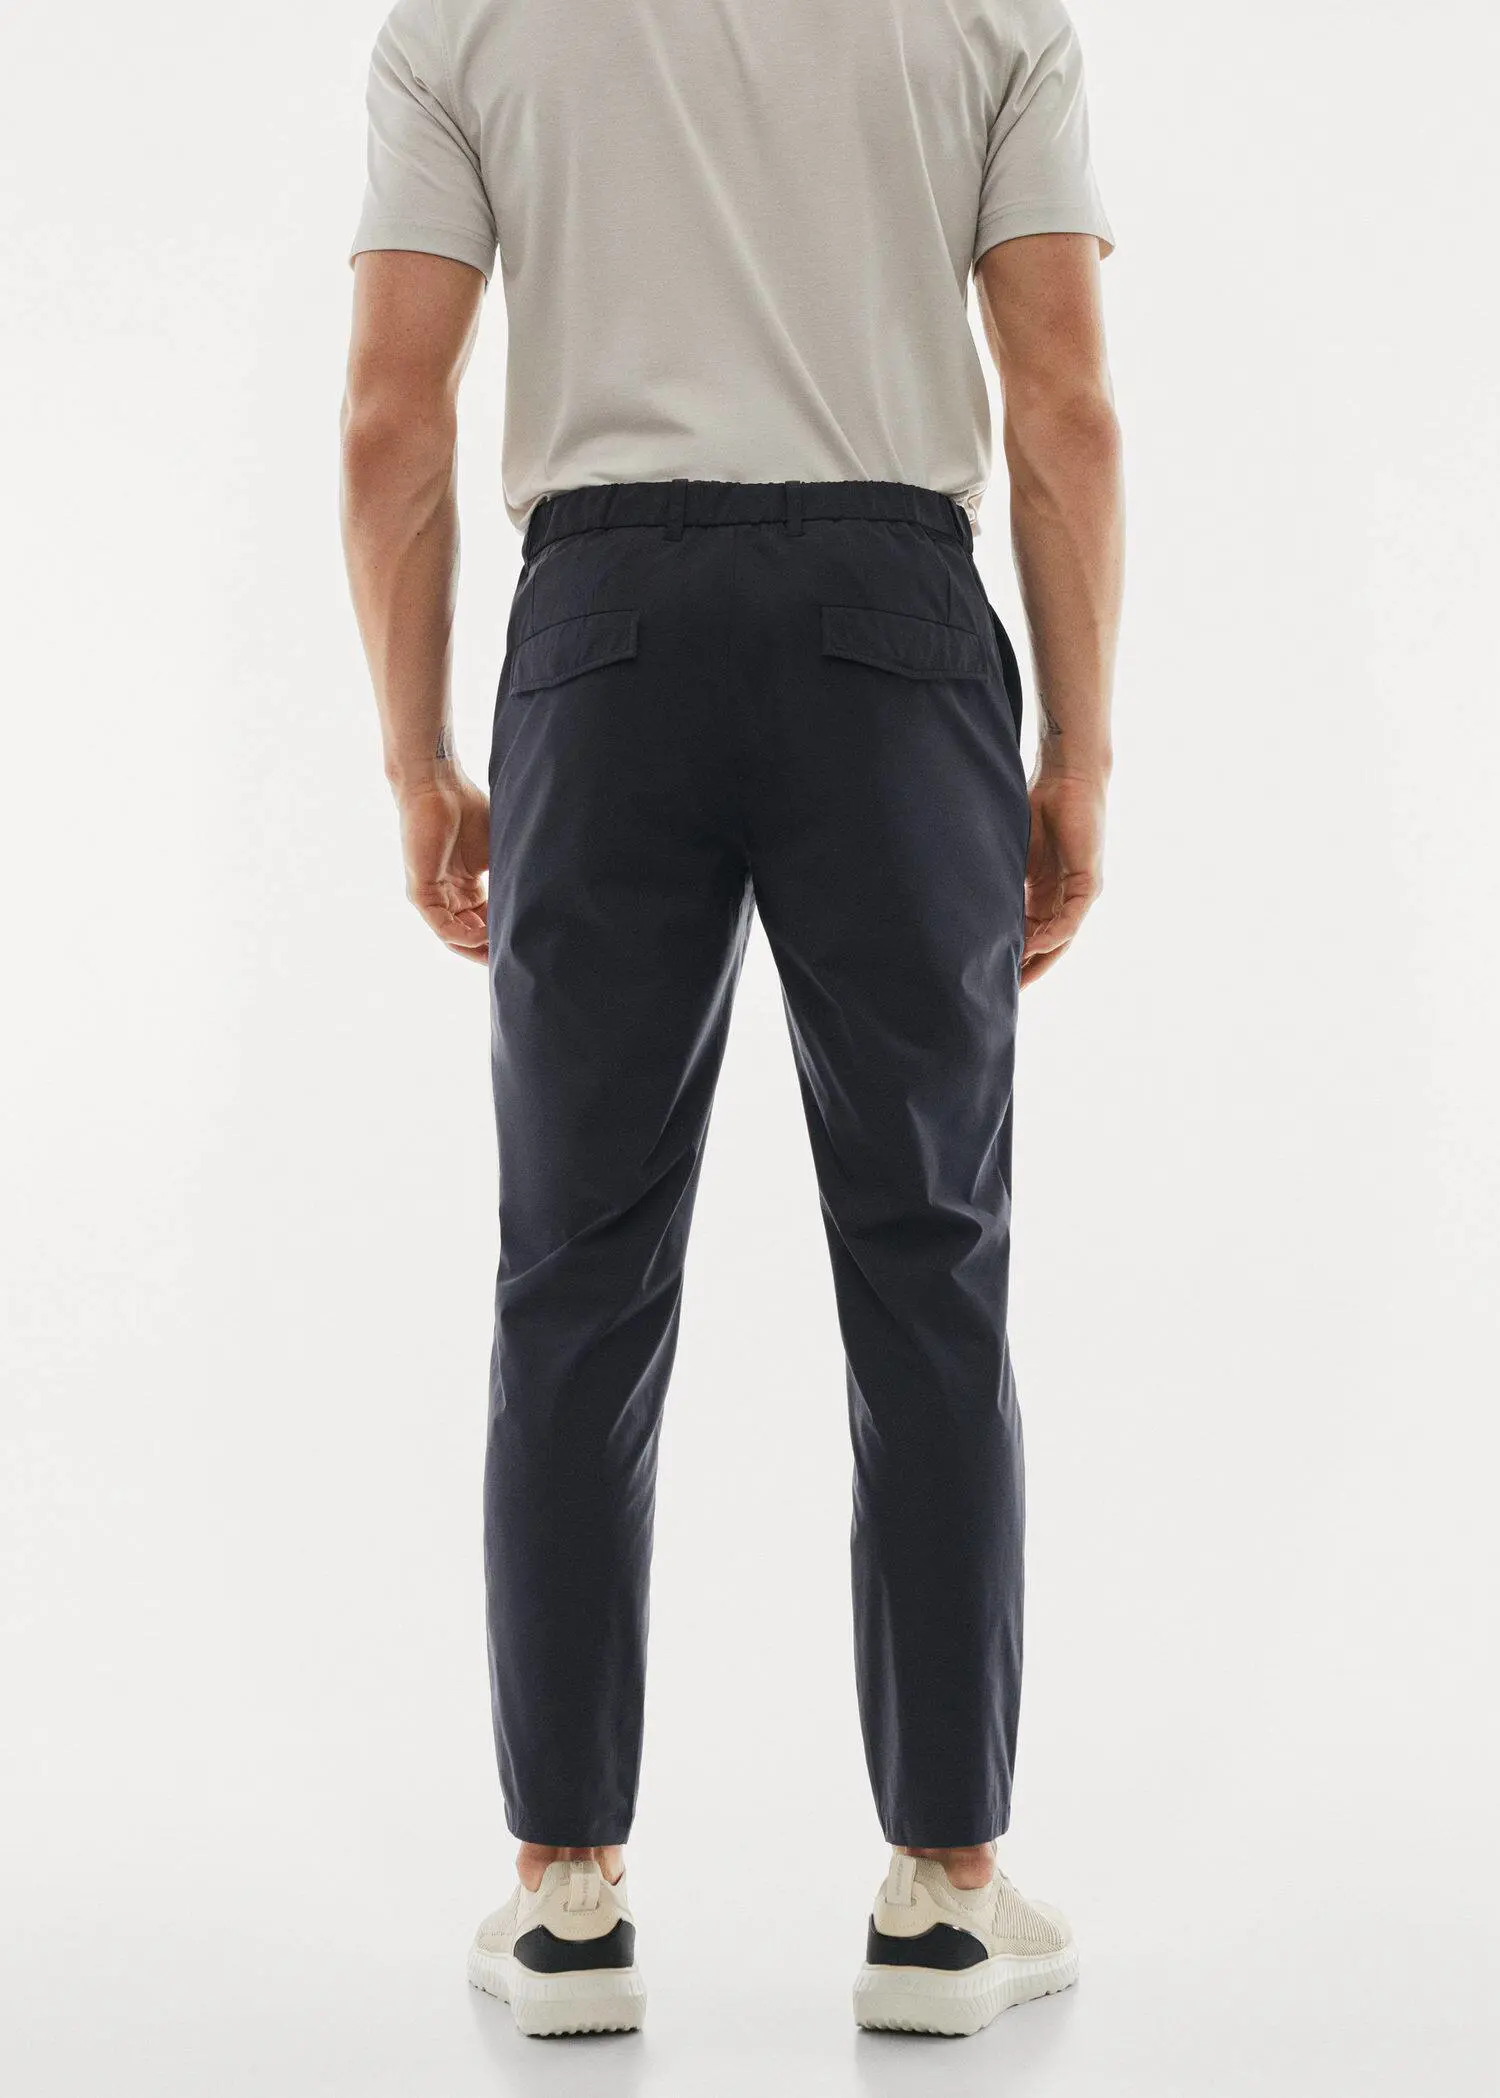 Mango Water-repellent technical trousers. a man standing in front of a white wall. 